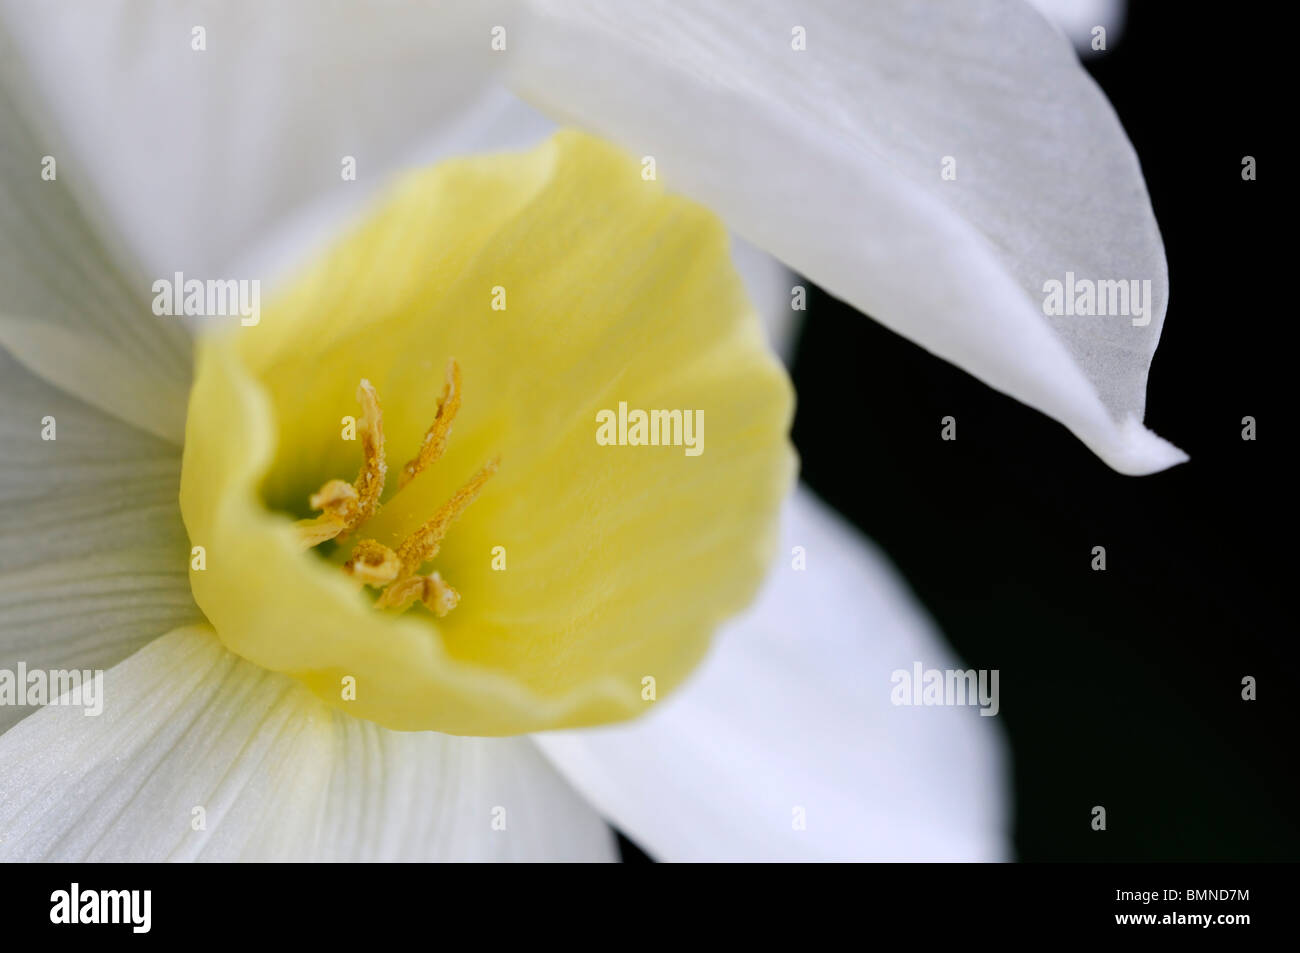 Narcissus sailboat Daffodil macro photo Close up flower bloom blossom Jonquil hybrid white petals pale yellow cup turns cream Stock Photo